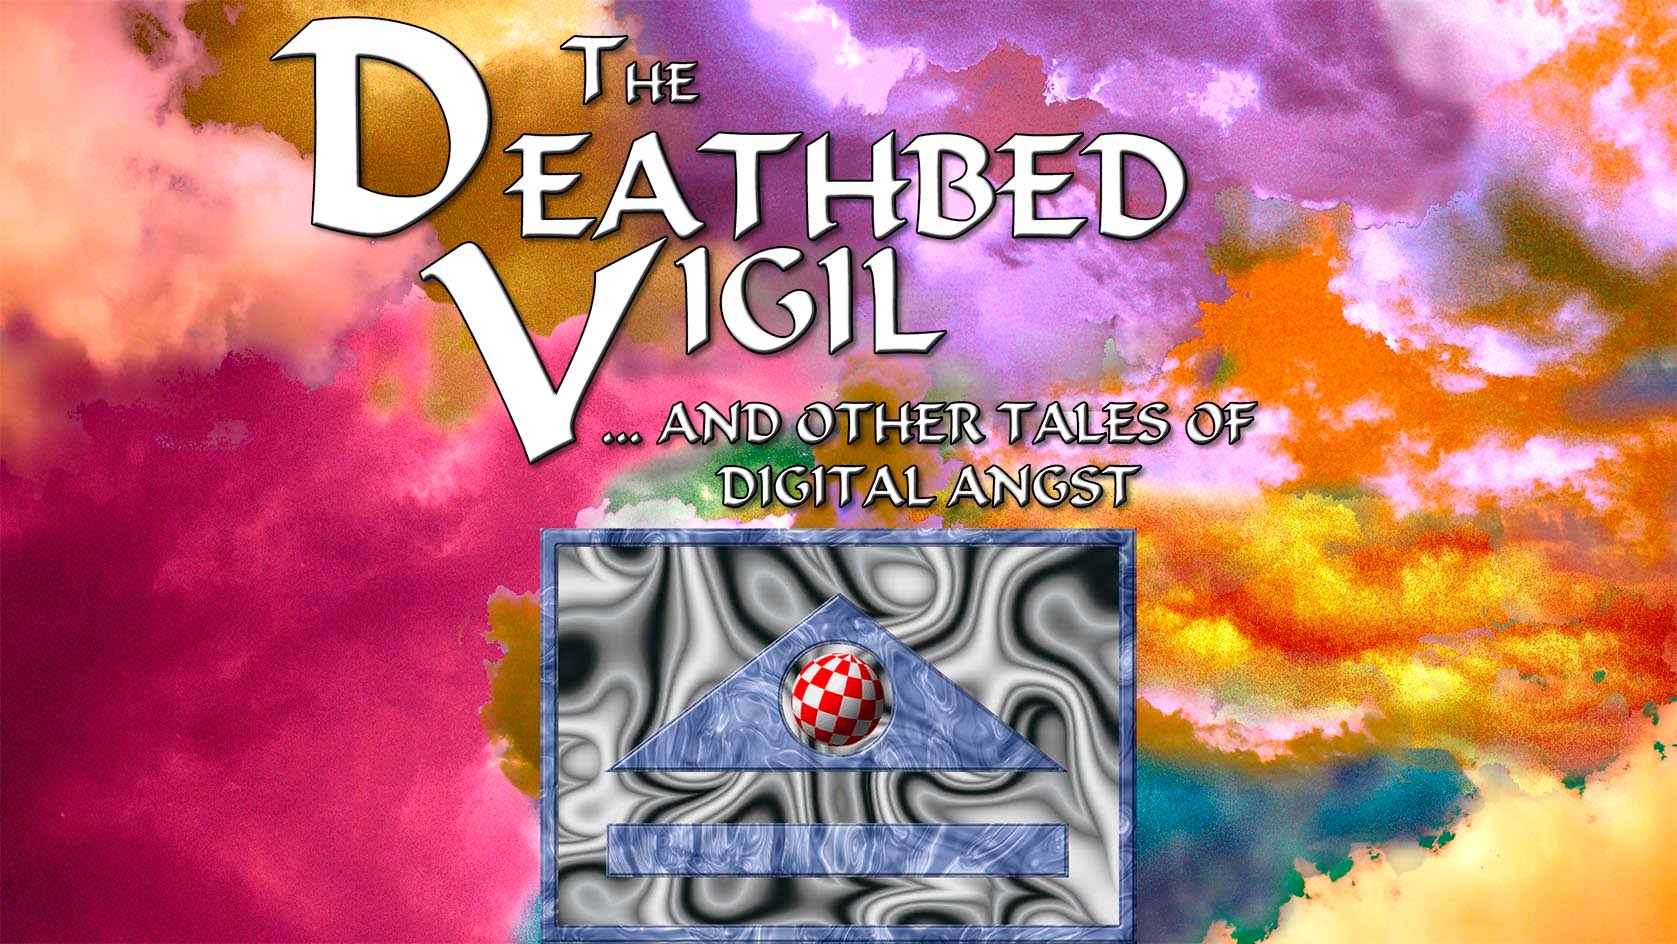 The Deathbed Vigil and other tales of digital angst